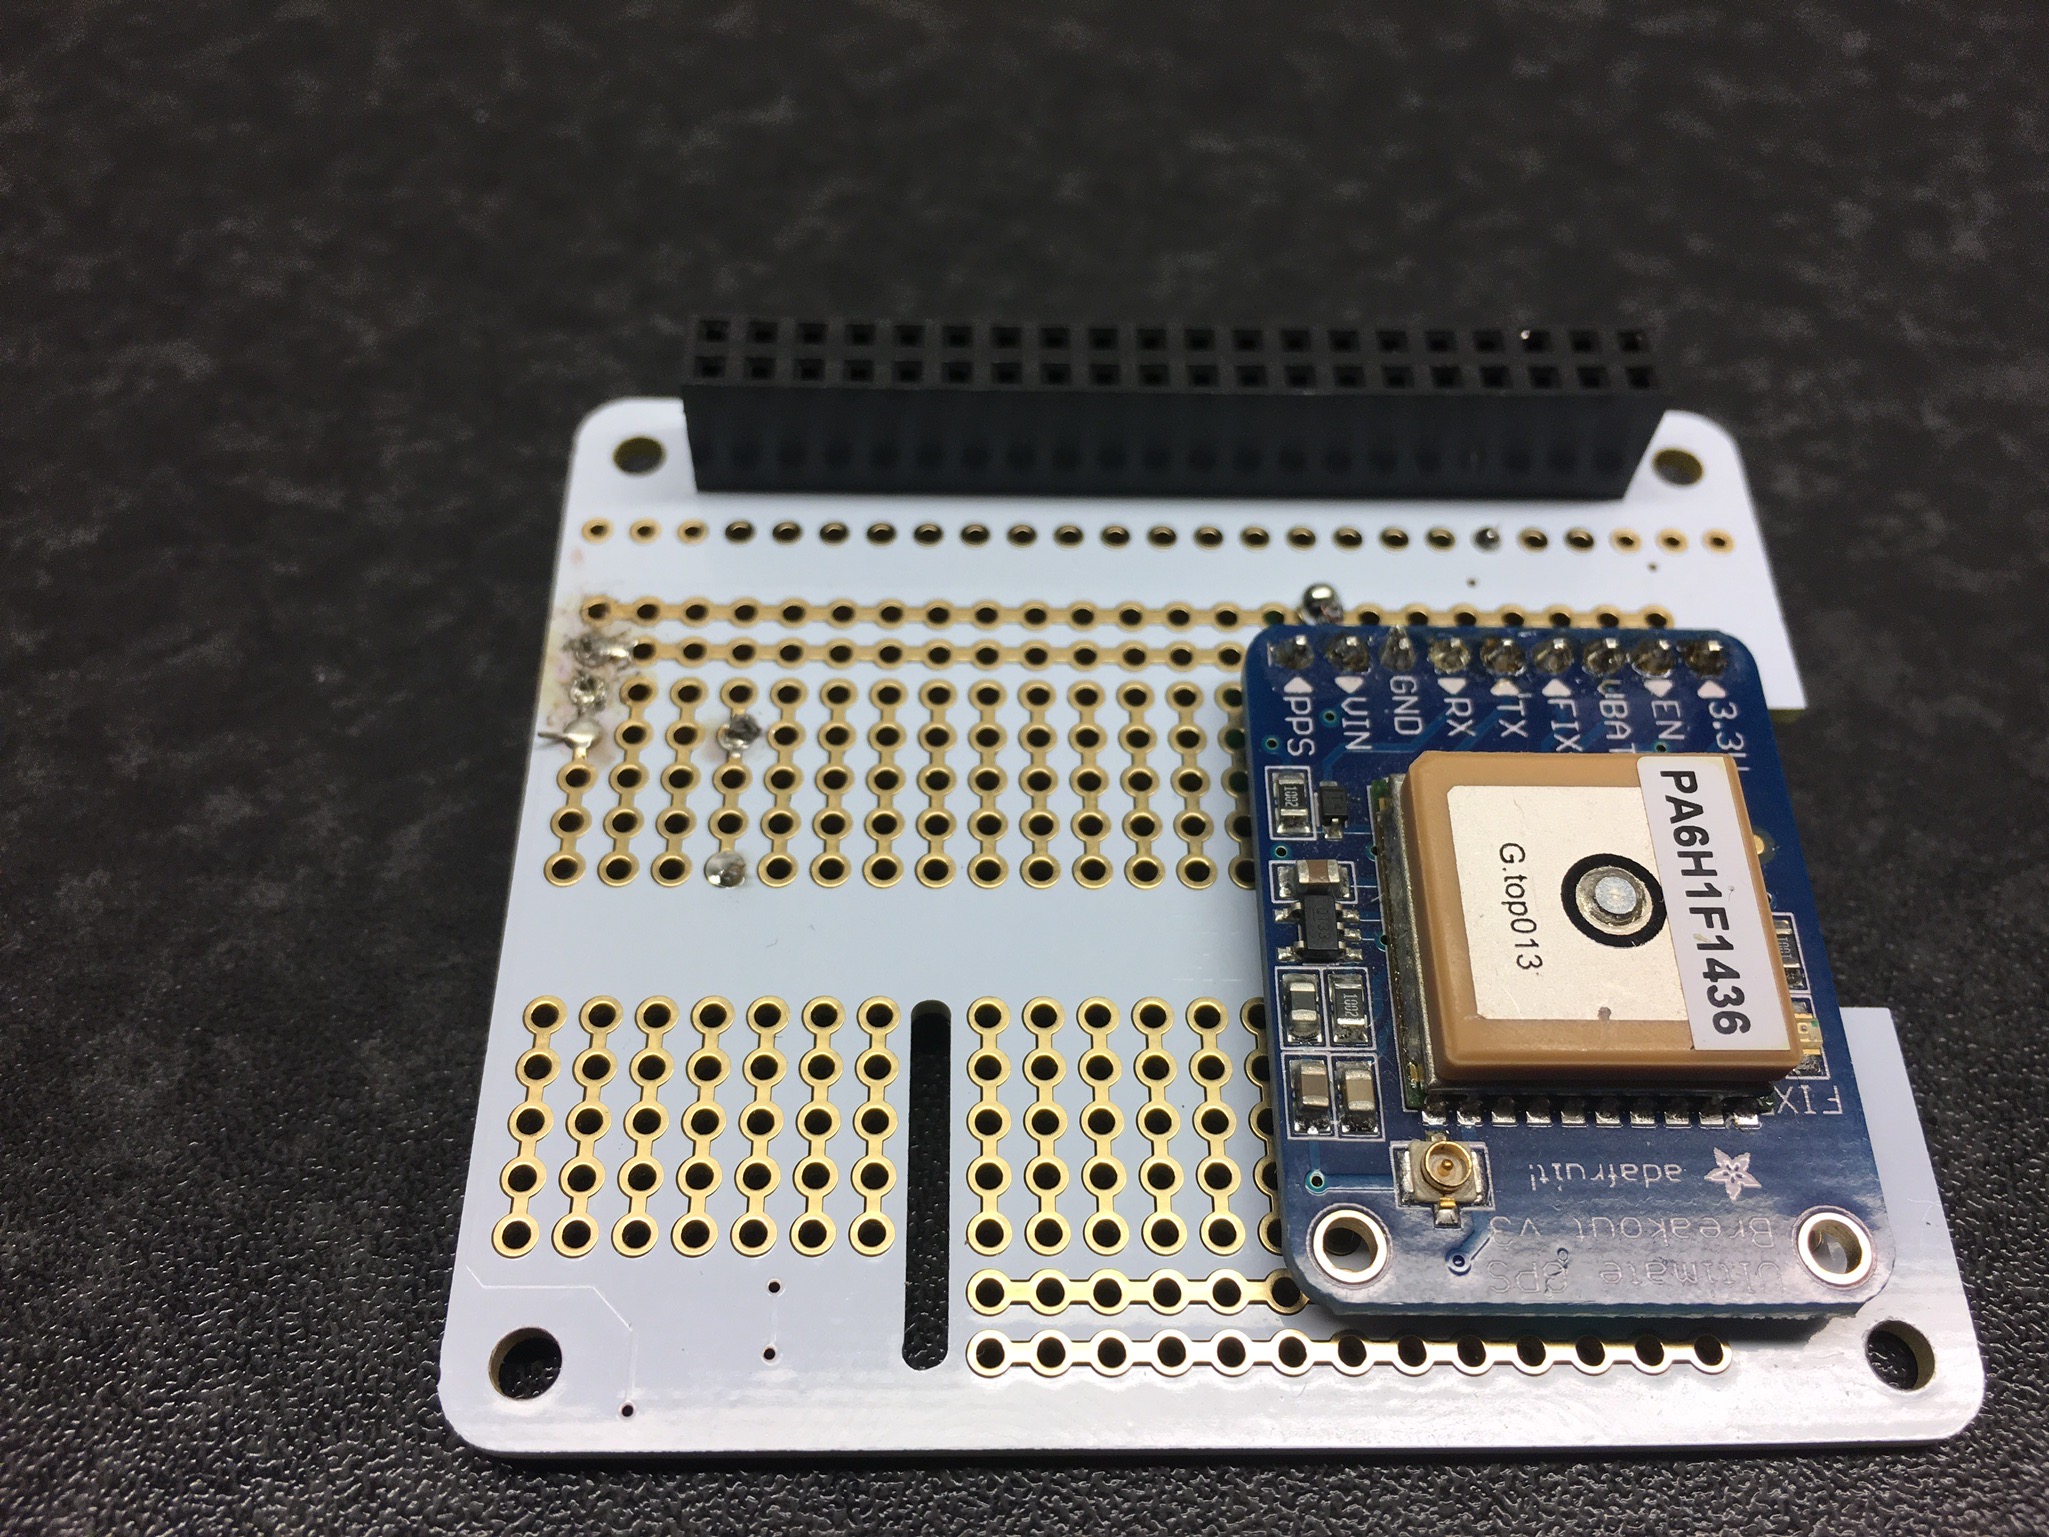 GPS soldered to the proto hat